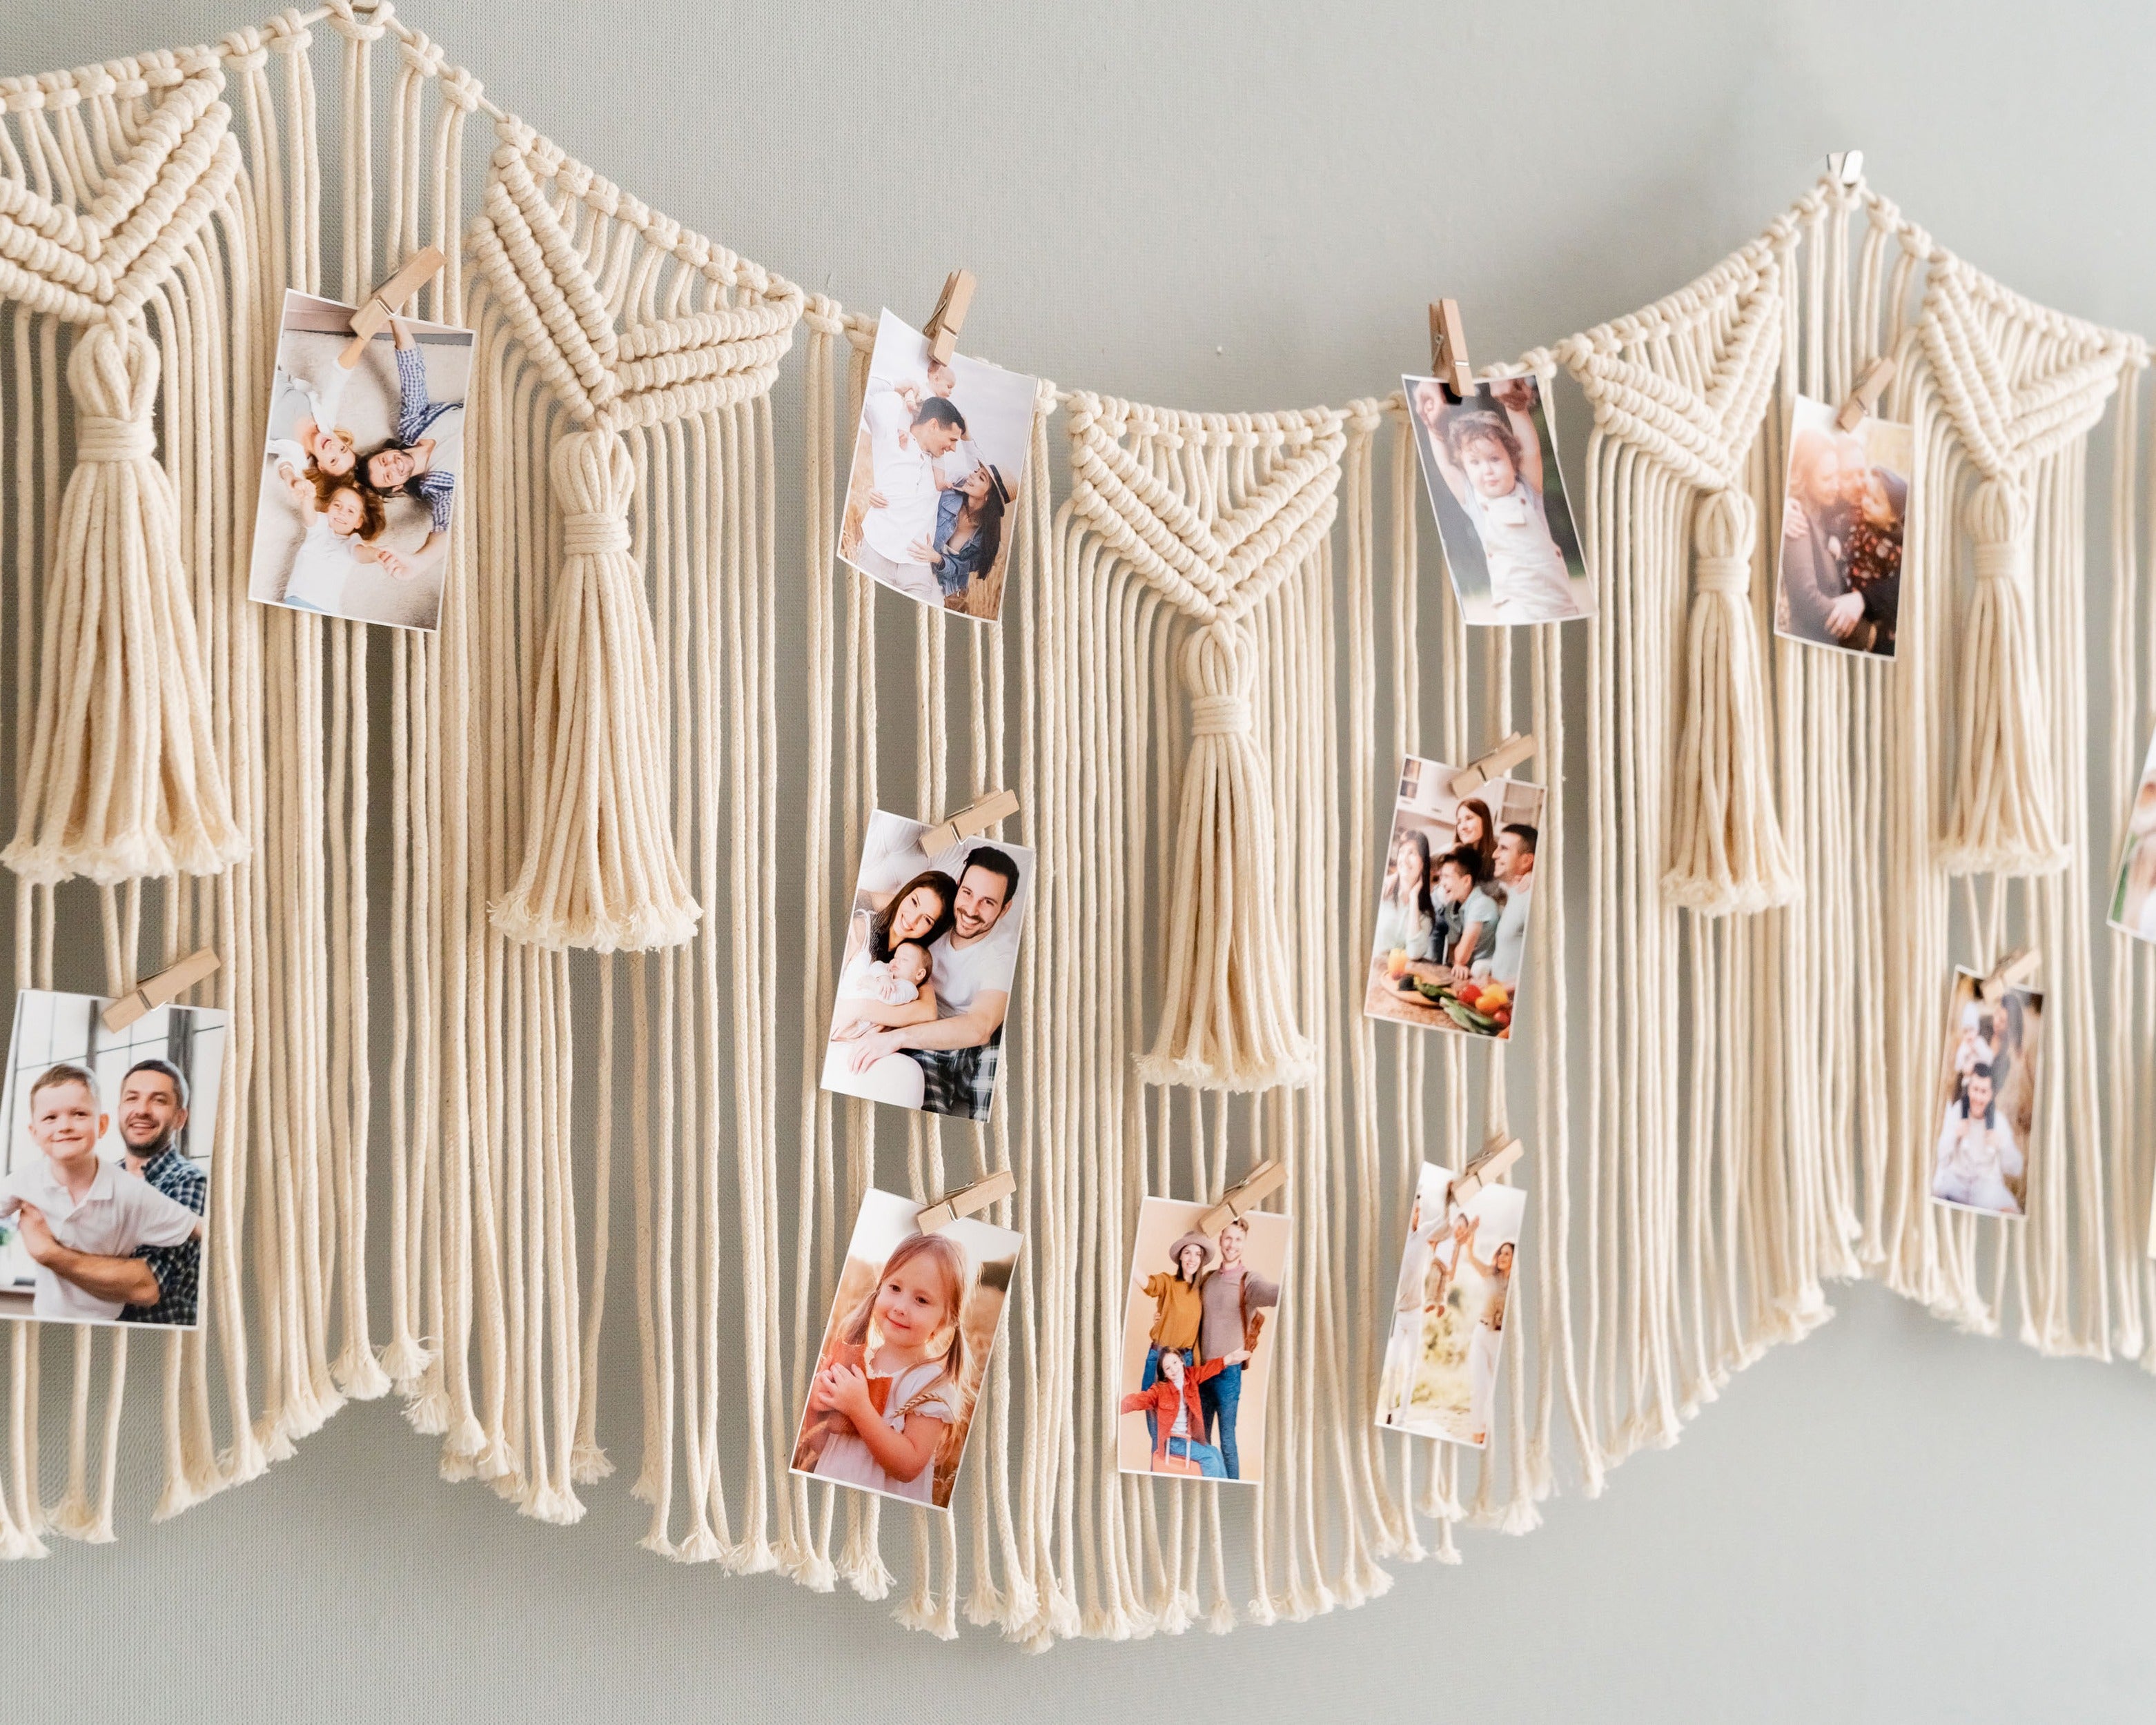 Boho Photo Hanger For Your Chic Wall Photo Display Solution